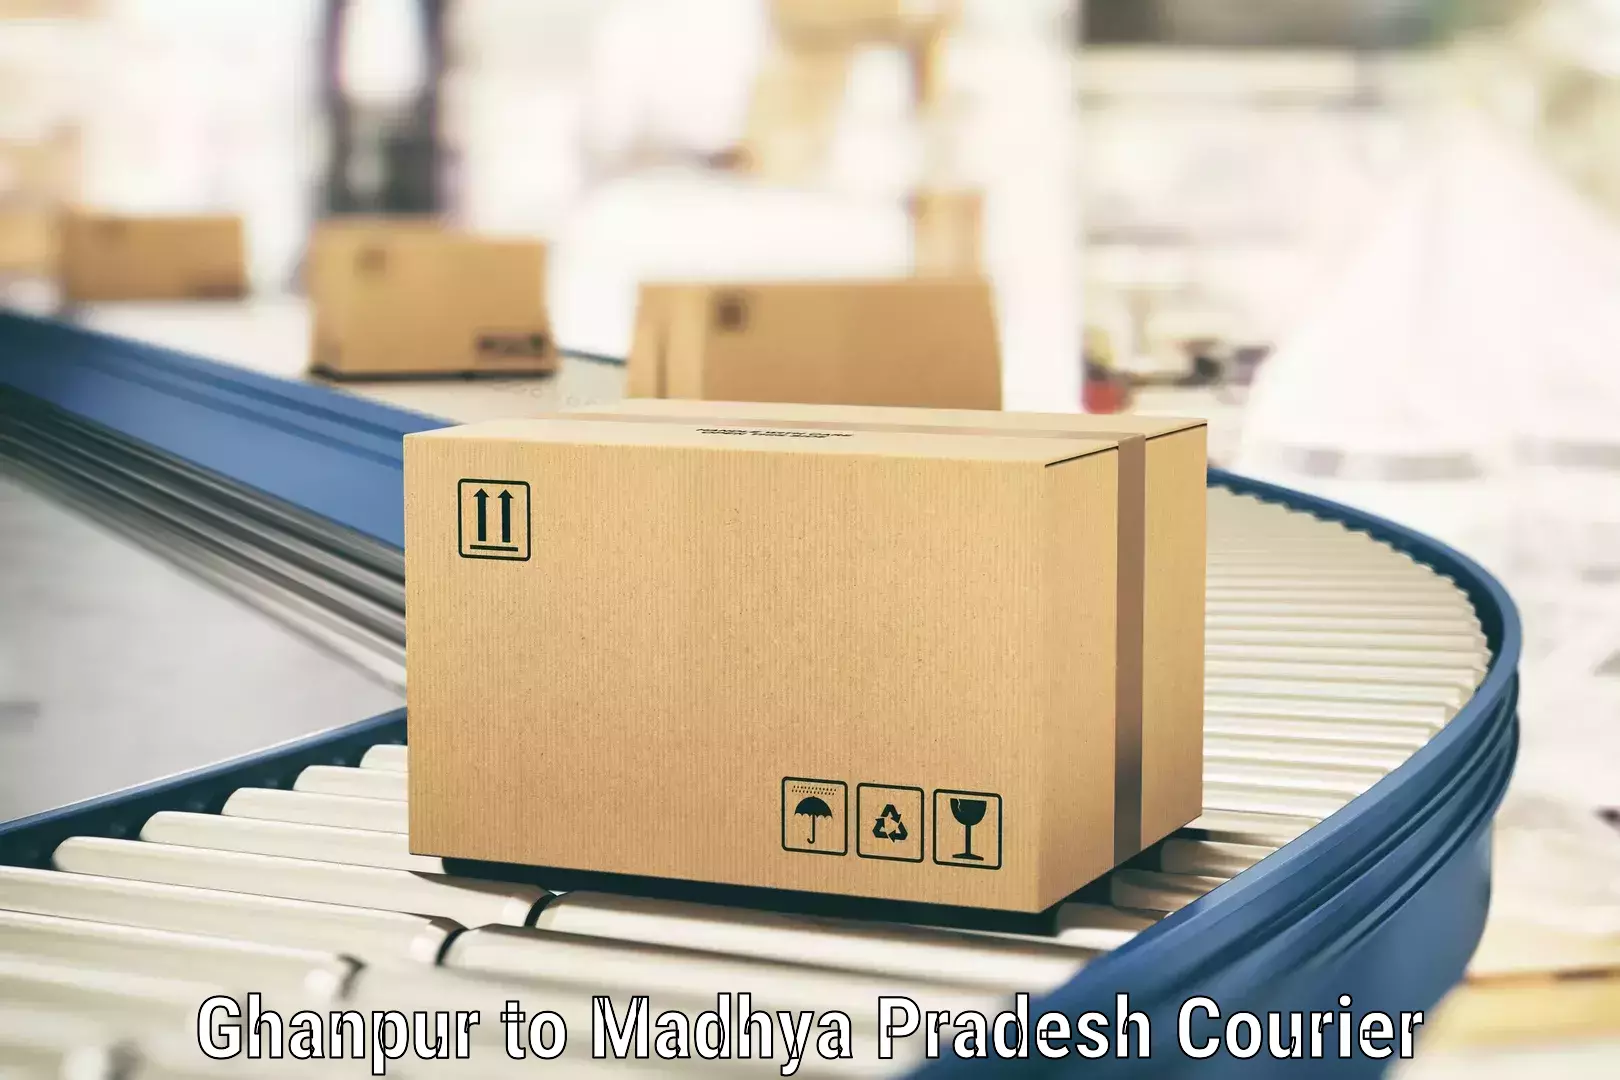 Modern courier technology Ghanpur to Nagda